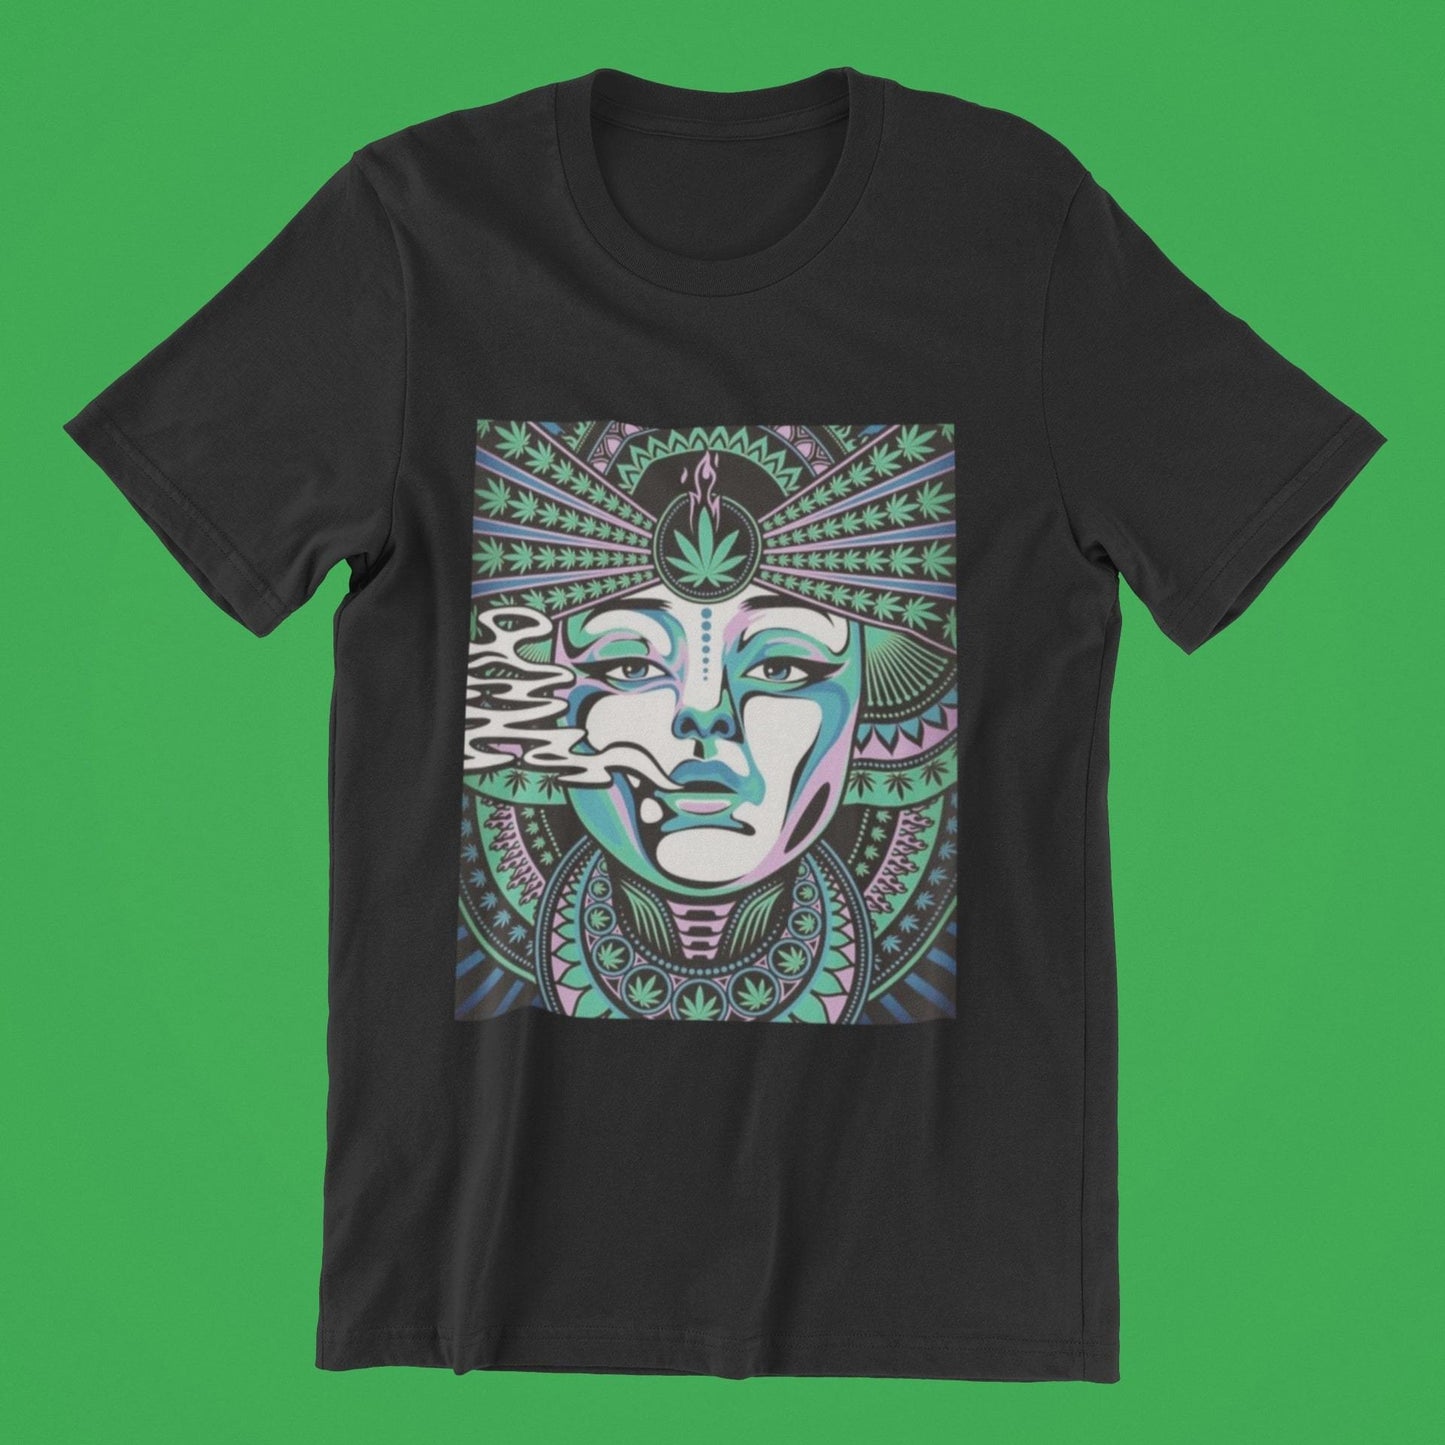 Psychedelic Weed Smoking Art Inspired T shirt for Men - Insane Tees